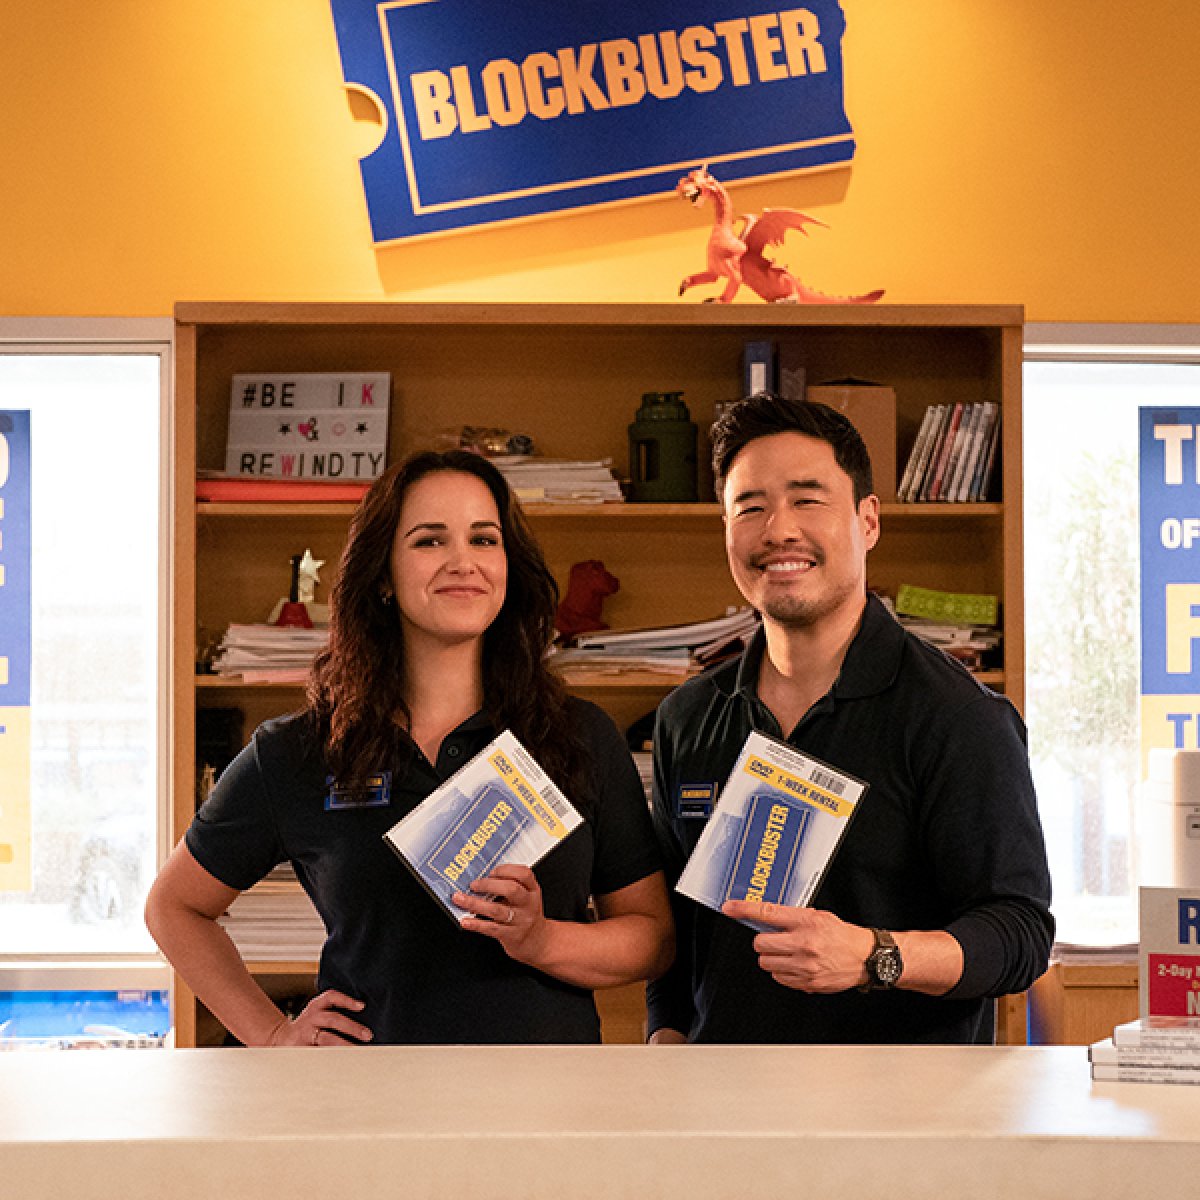 Is the Last 'Blockbuster' Still Open? The Truth About Netflix Show Location